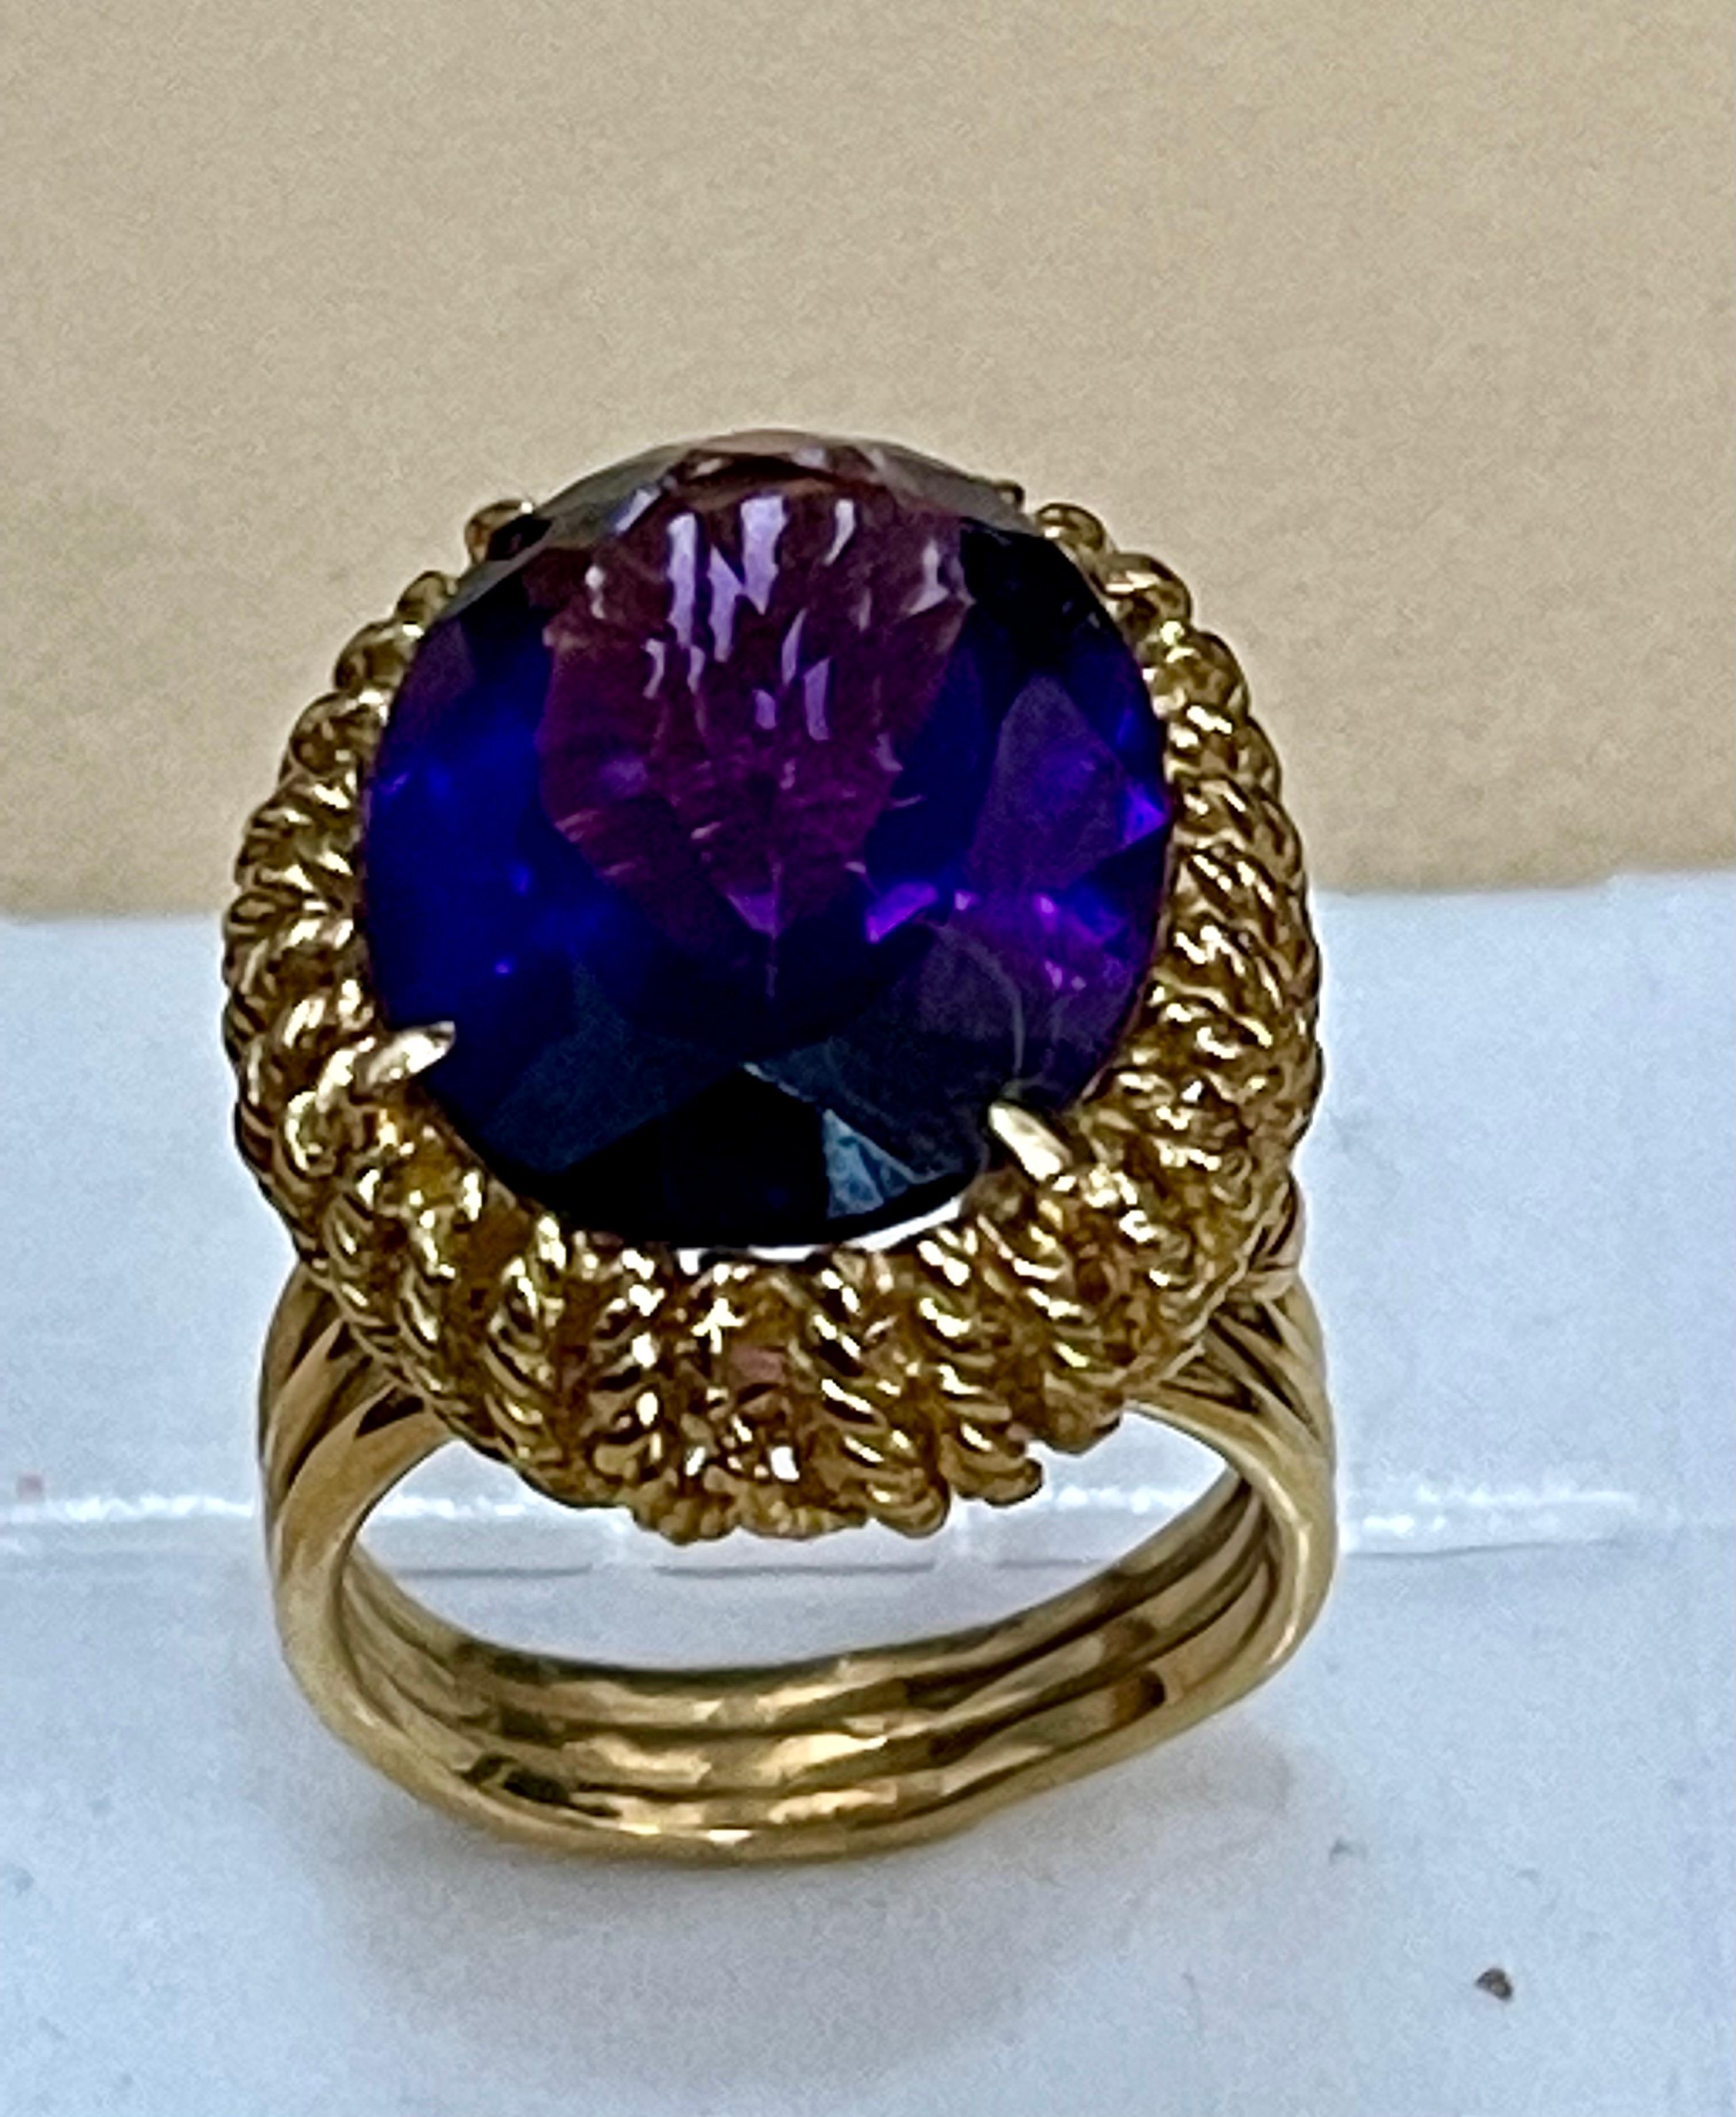 13 Carat Natural Oval Amethyst Cocktail Ring in 18 Karat Yellow Gold, Estate For Sale 6